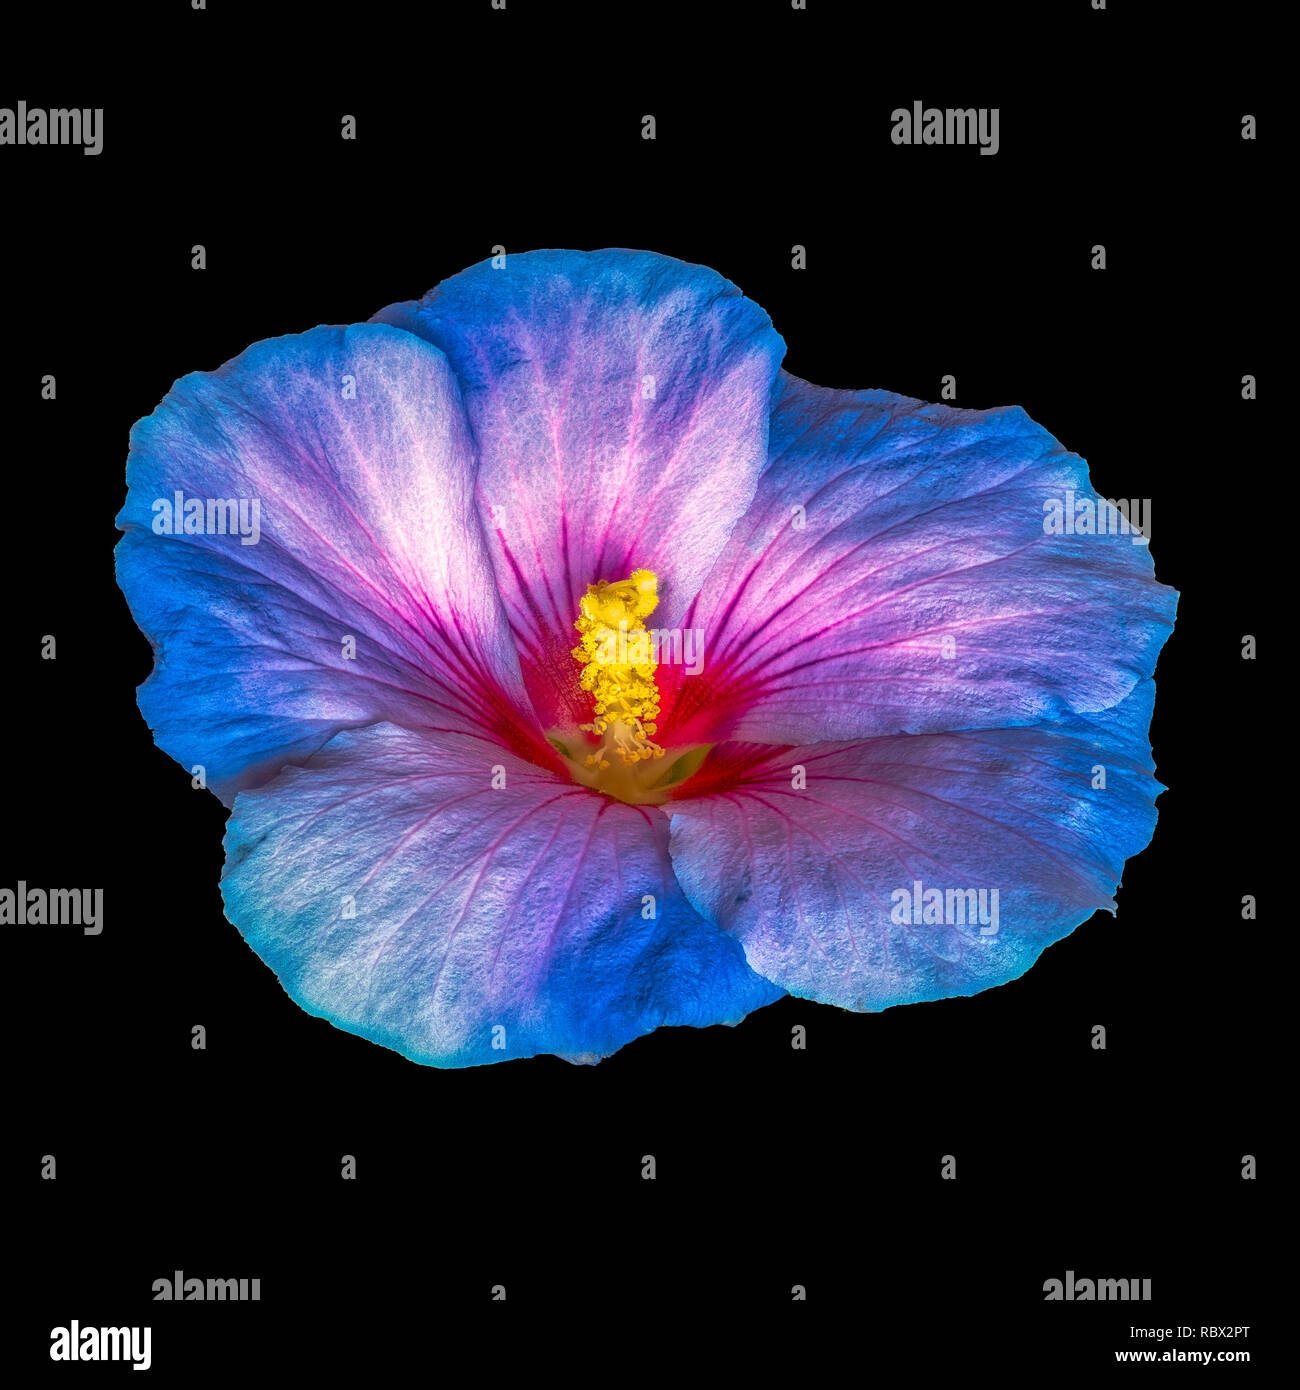 Floral Bright Color Macro Flower Image Of A Single Isolated Blooming Open Blue Red Hibiscus Blossom Detailed Texture Black Background Surreal Stock Photo Alamy